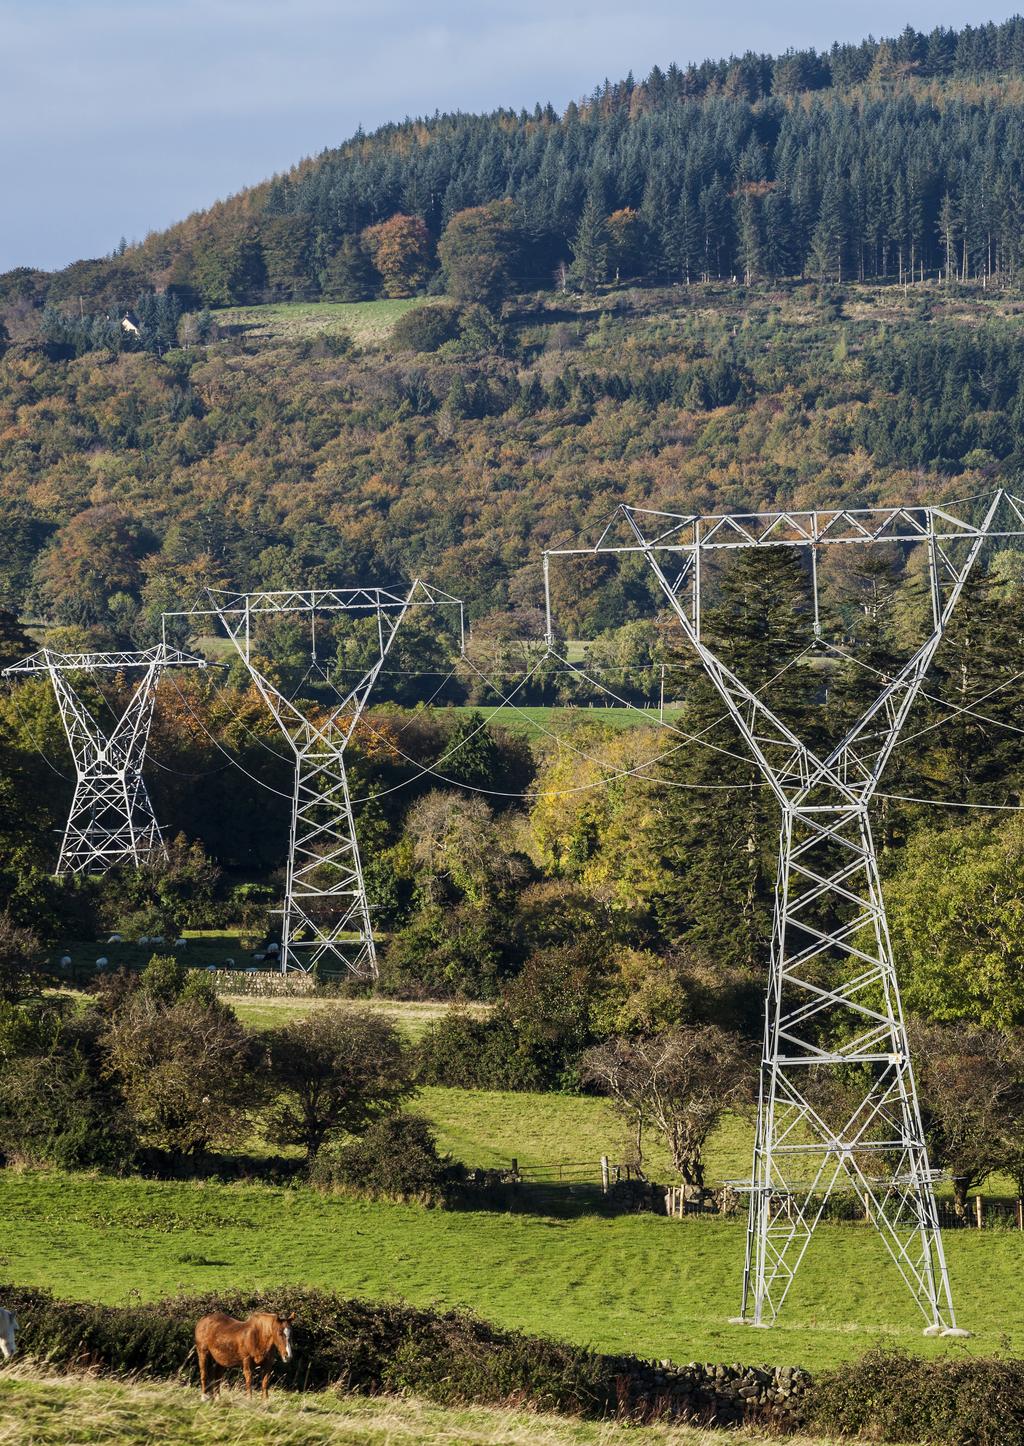 Introducing scenario planning At EirGrid, one of our roles is to plan the development of the electricity transmission grid to meet the future needs of society.